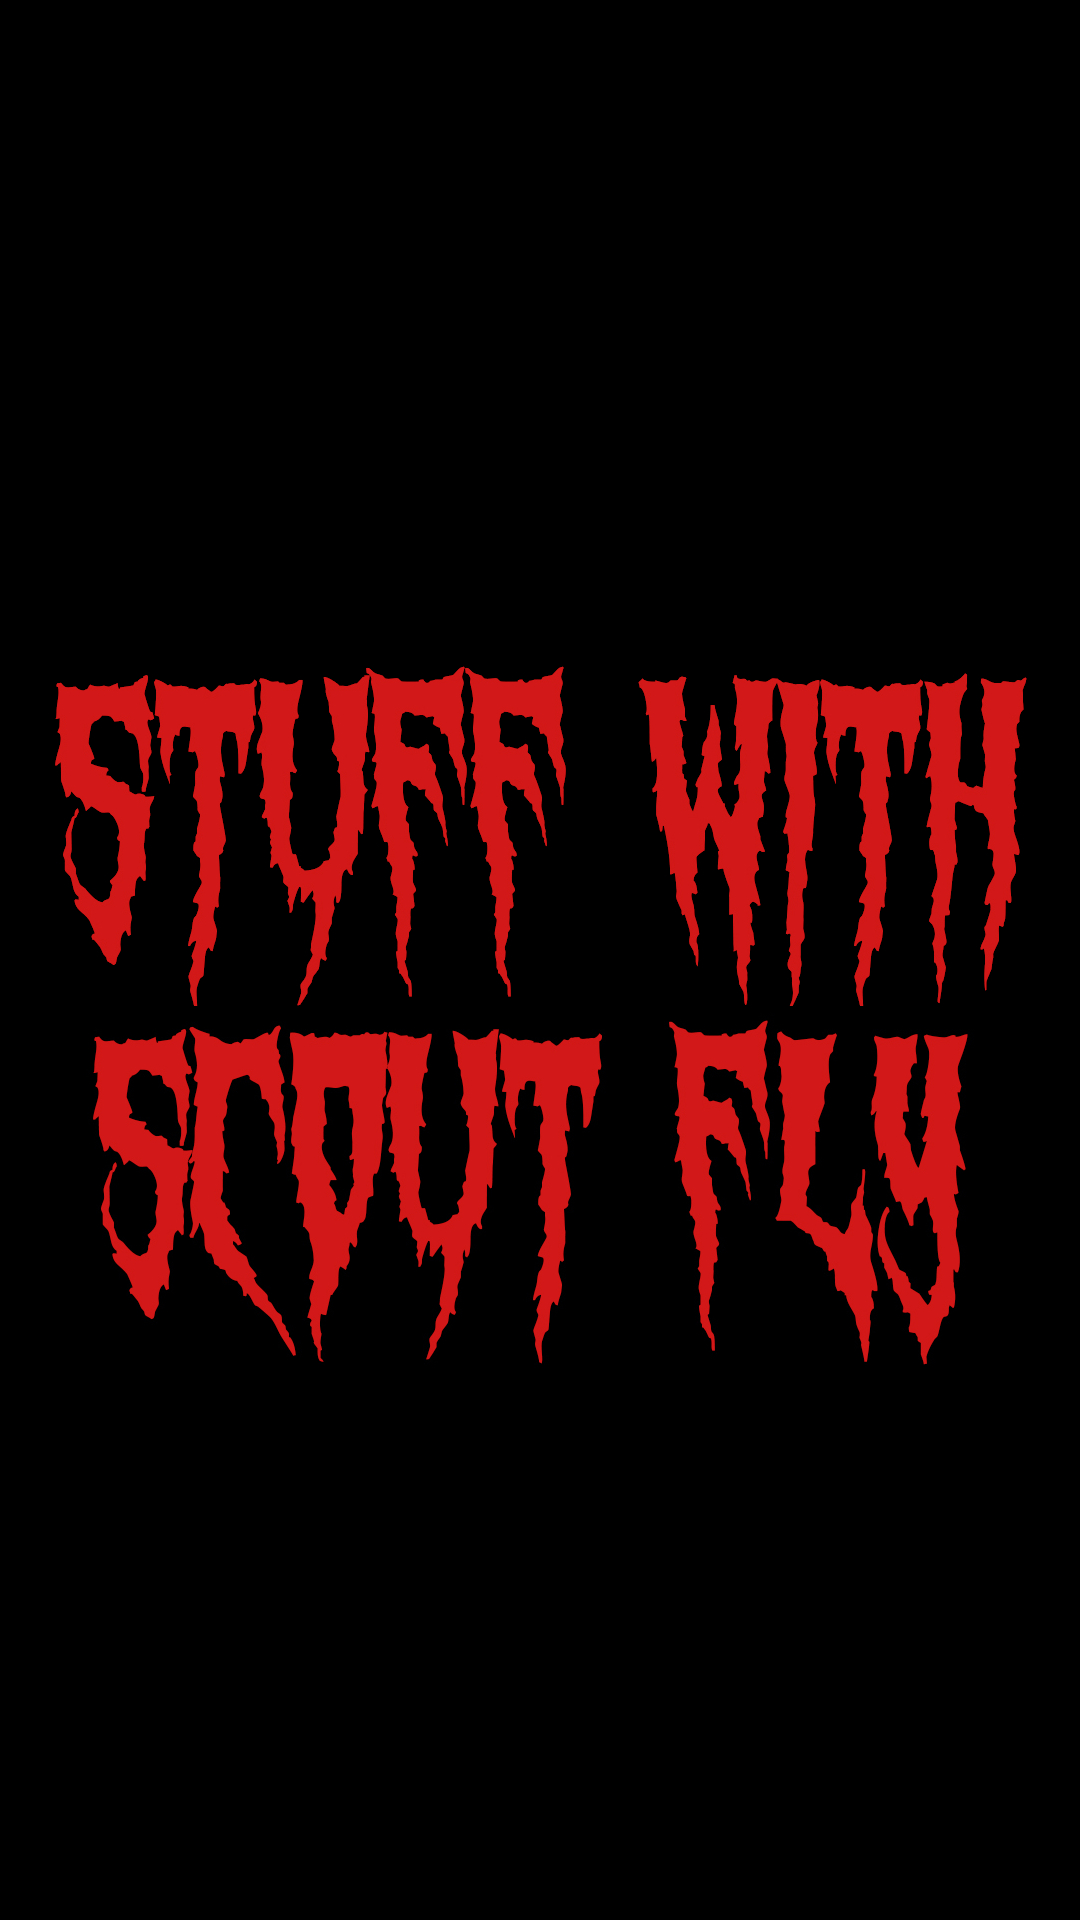 Stuff with Scout Fly